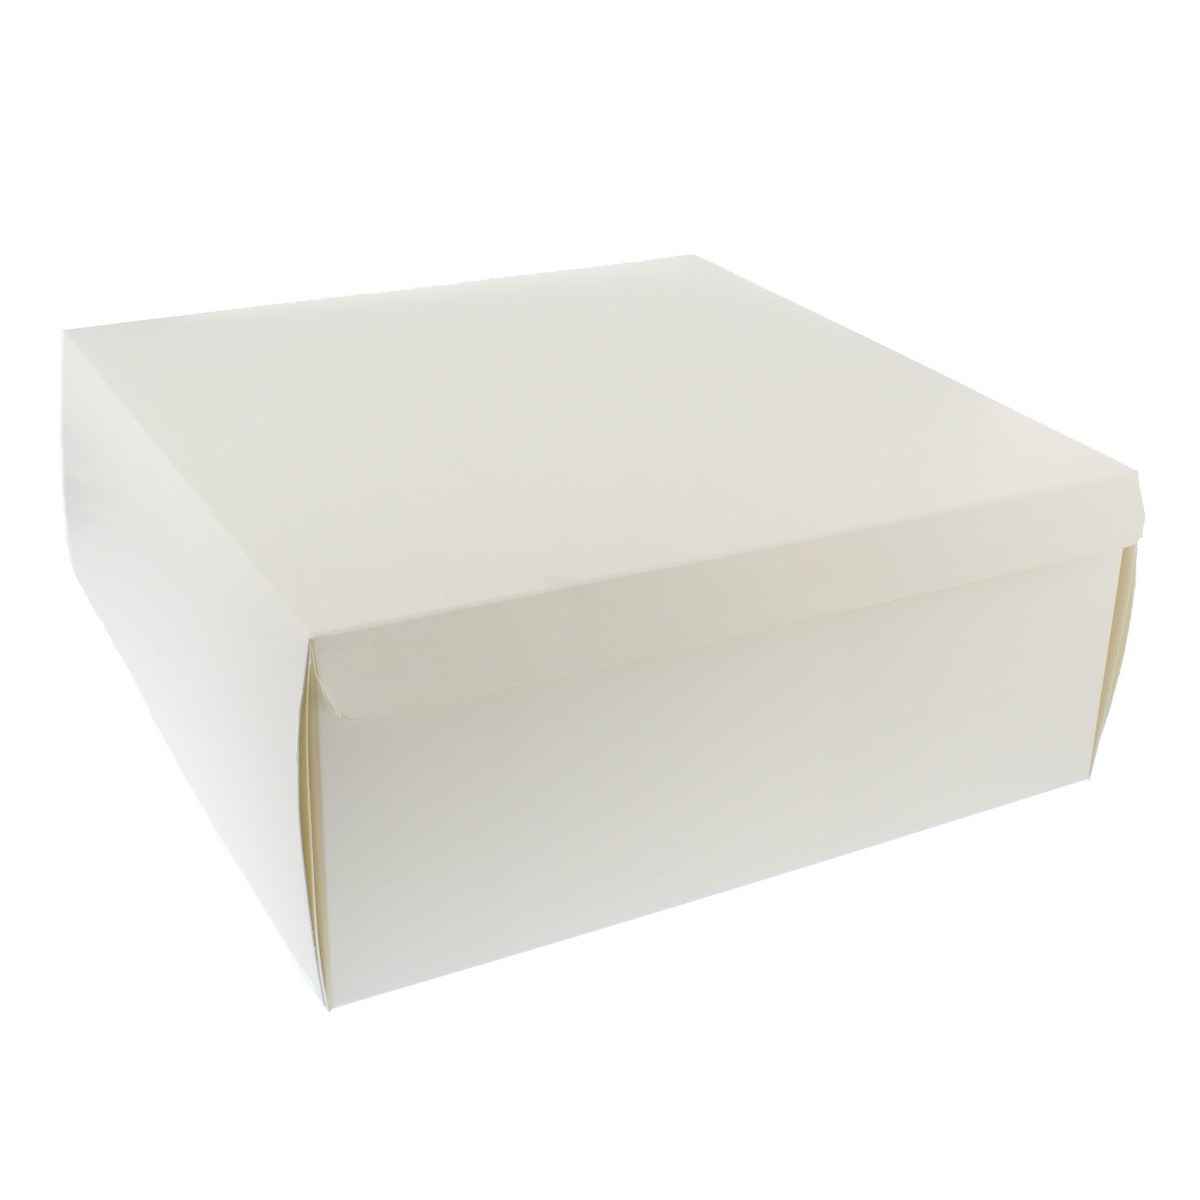 White Cake Boxes 12 X 12 X 5 Inch 275 Gsm 450 Micron Hinged